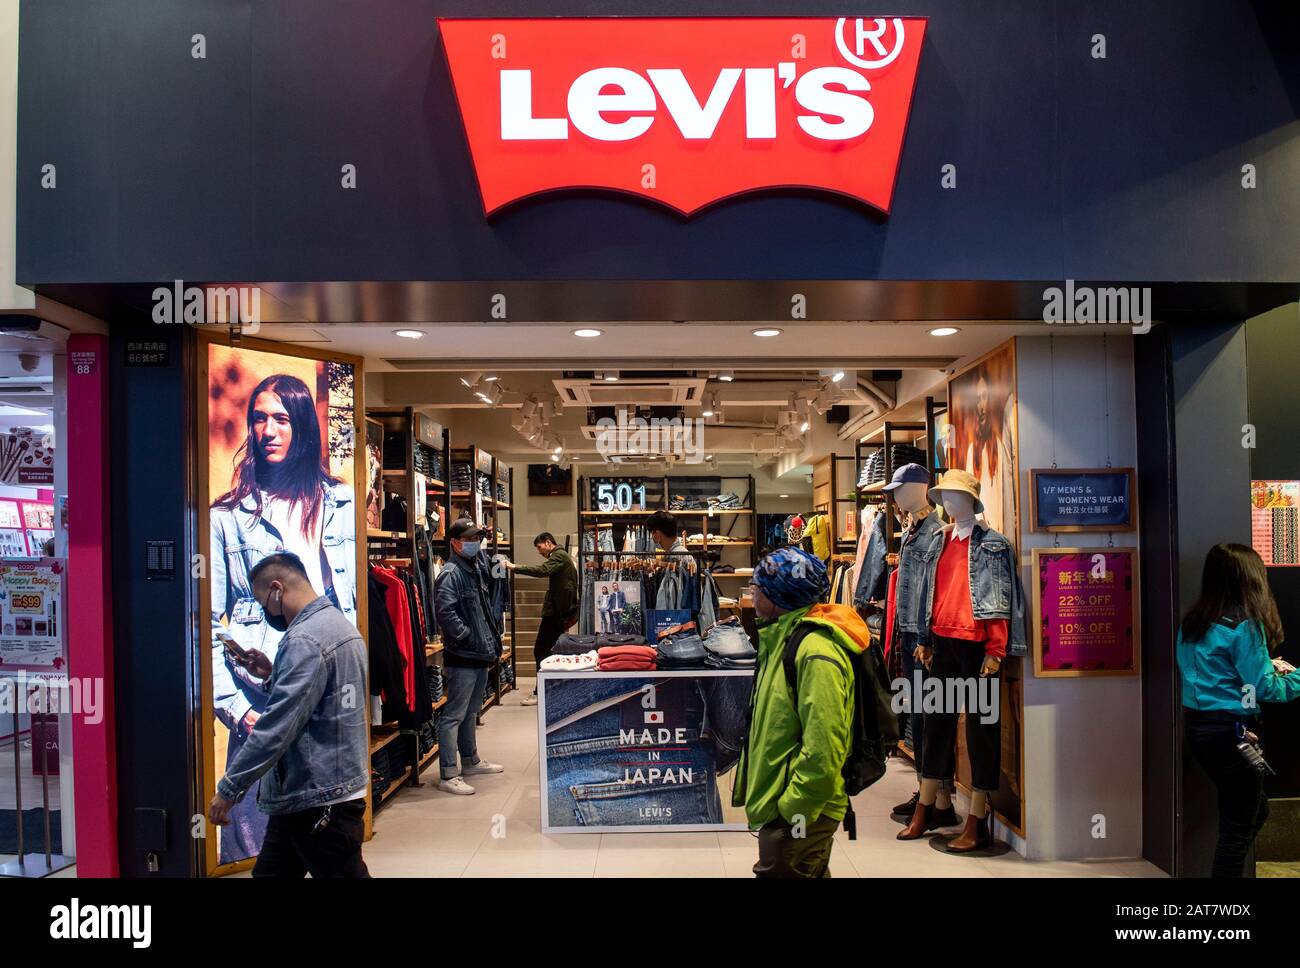 levis american store